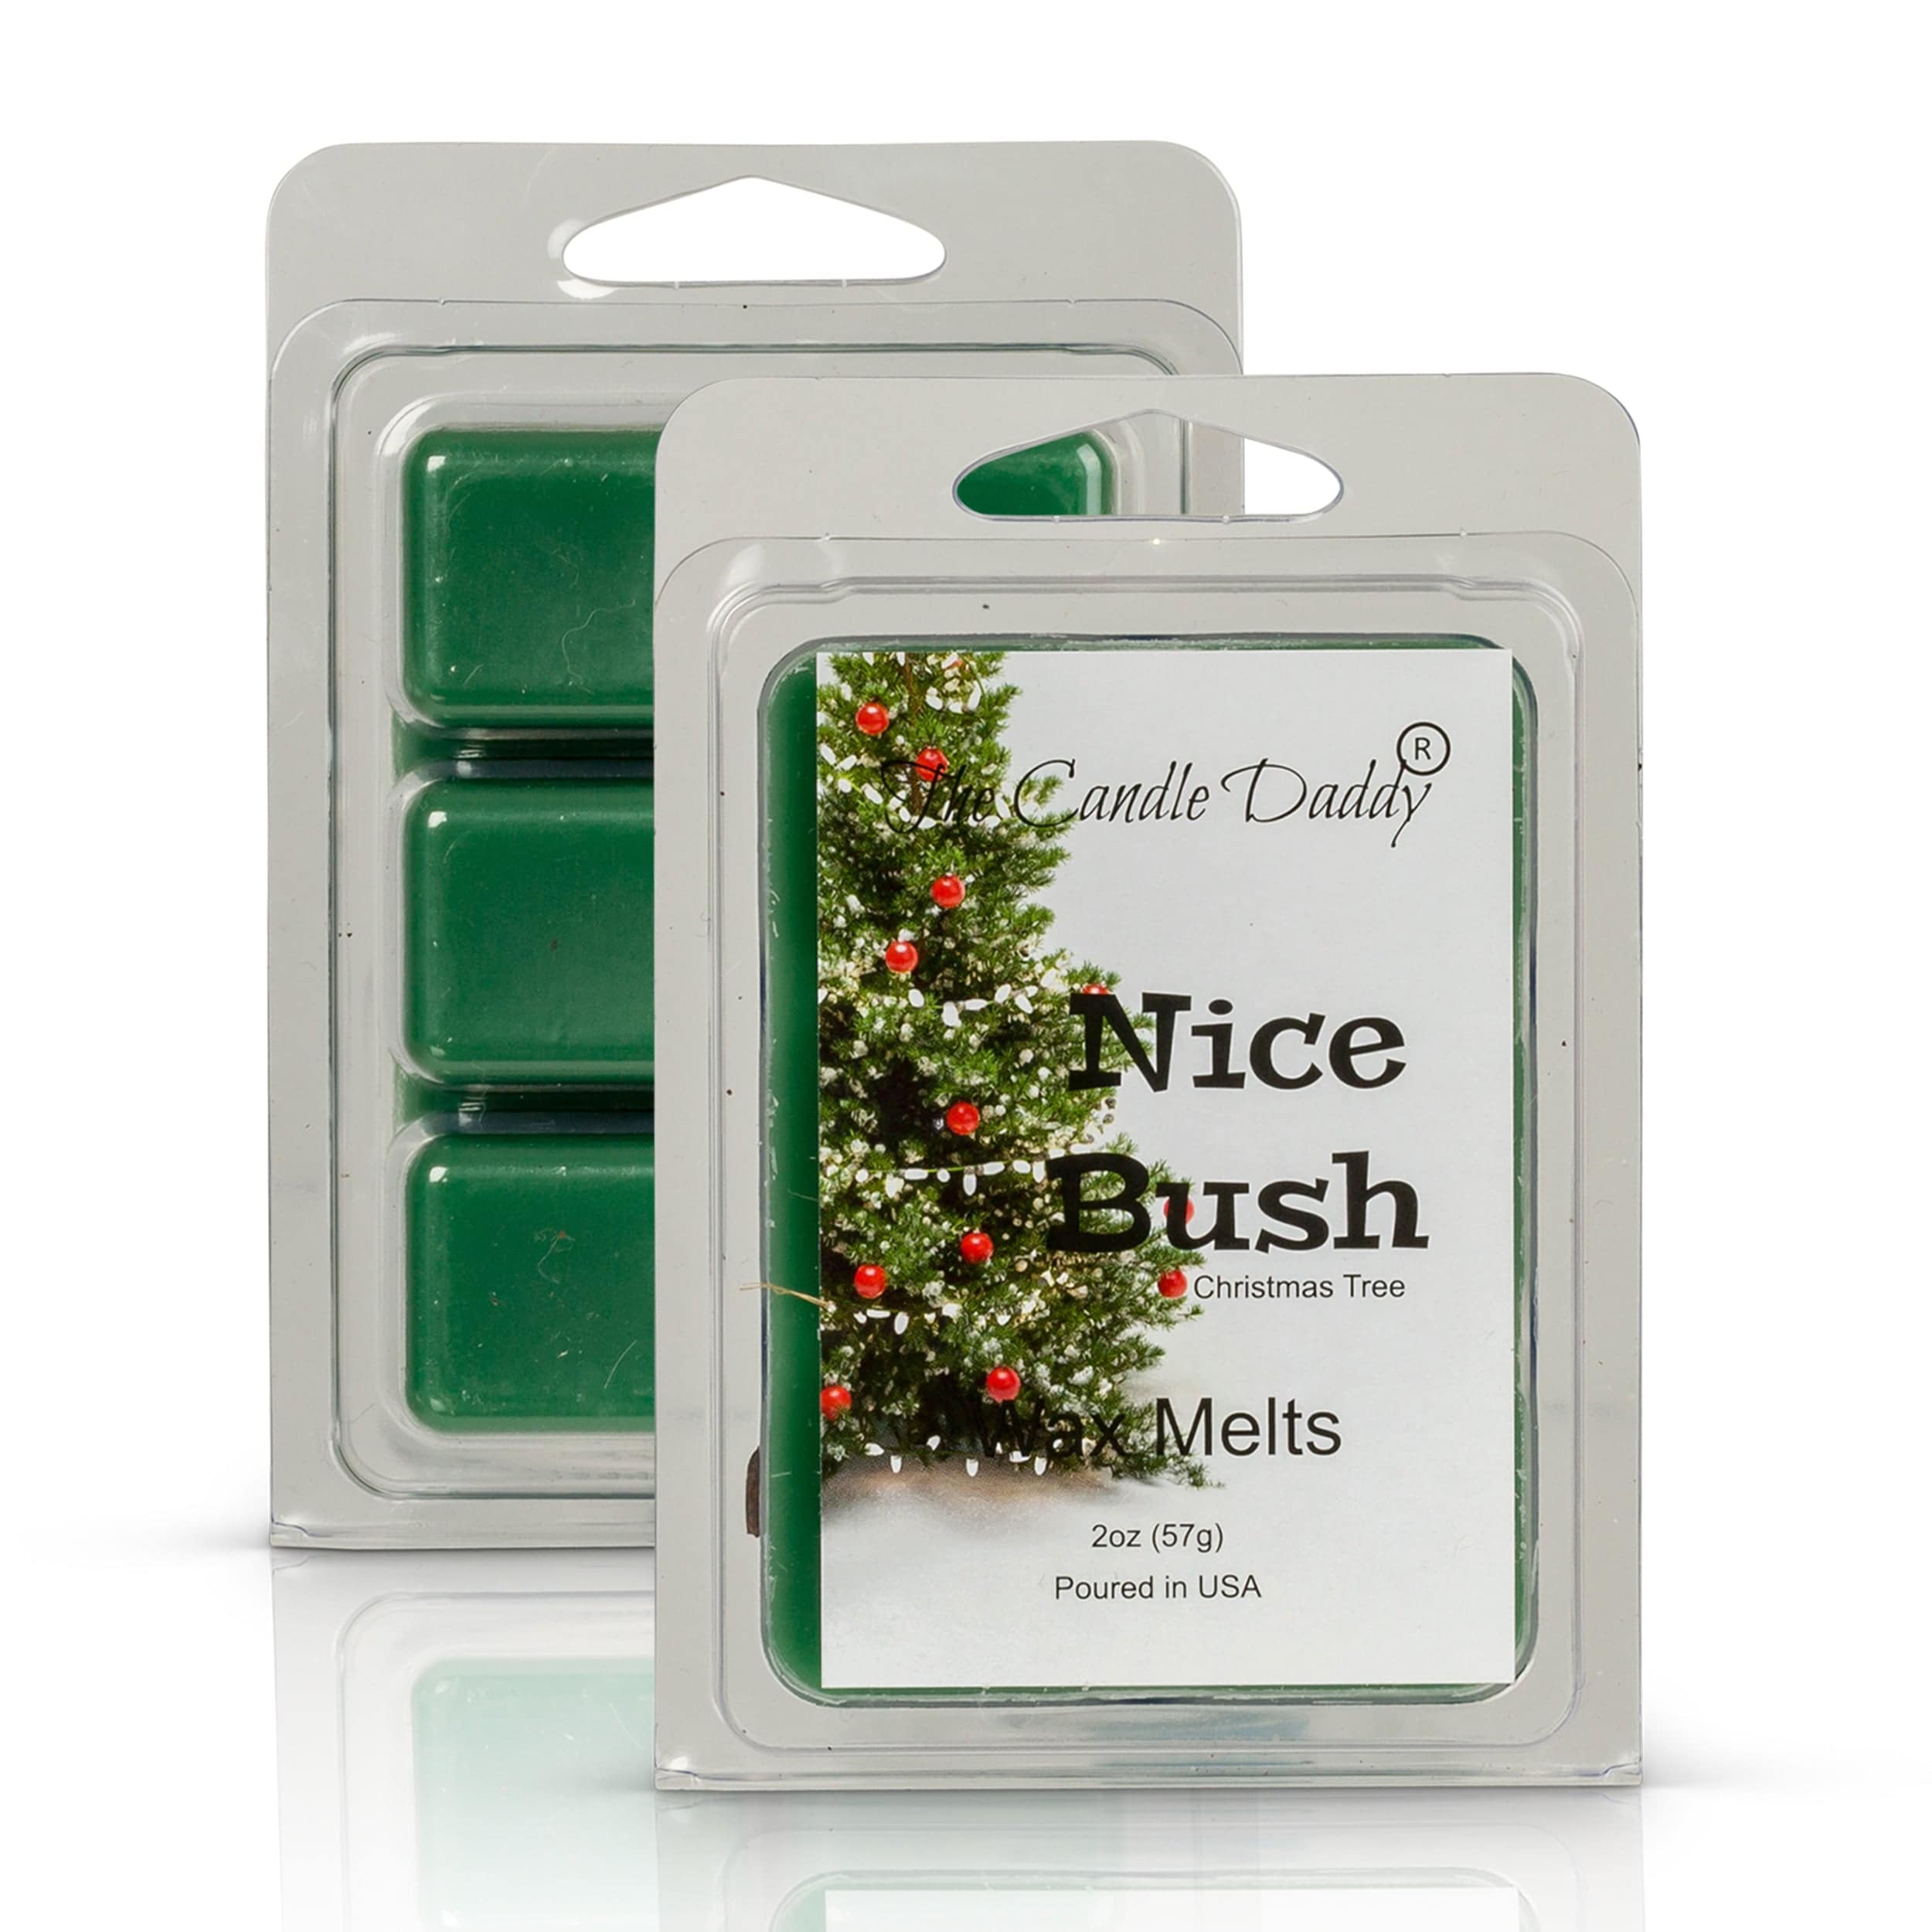 Christmas Wax Melts Variety Pack - Dickens Christmas, Christmas Tree, Christmas Eve - 3 Highly Scented 3 oz. Bars - Made Wit